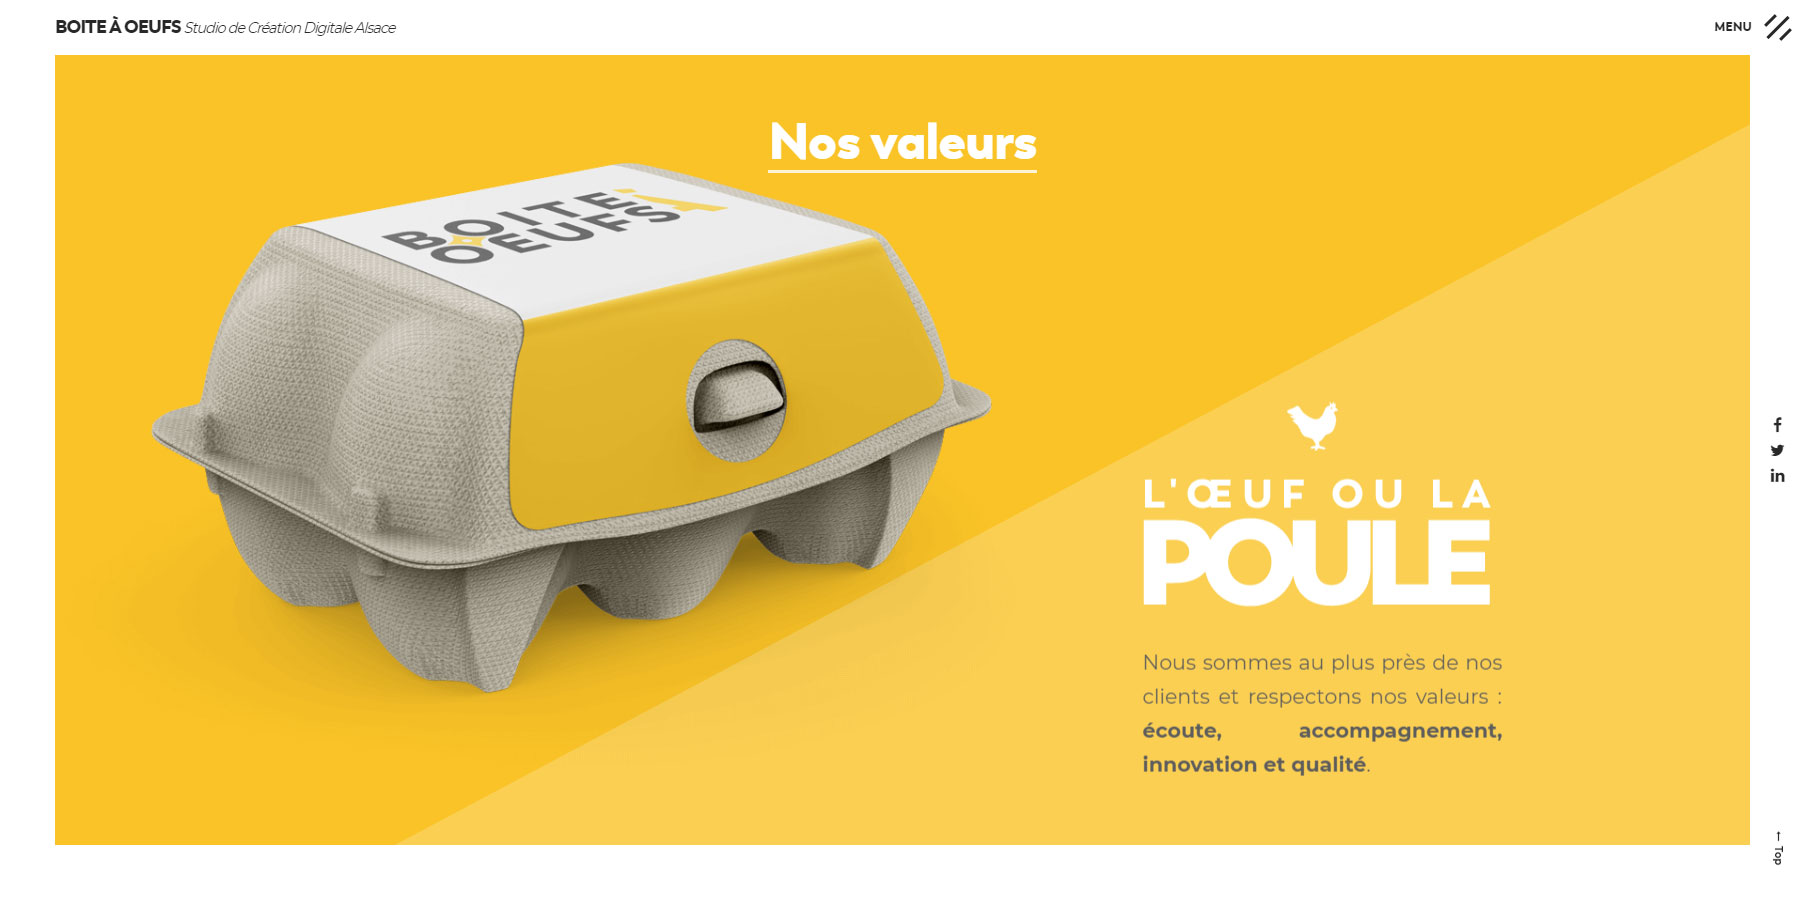 Boite à Oeufs - Website of the Day